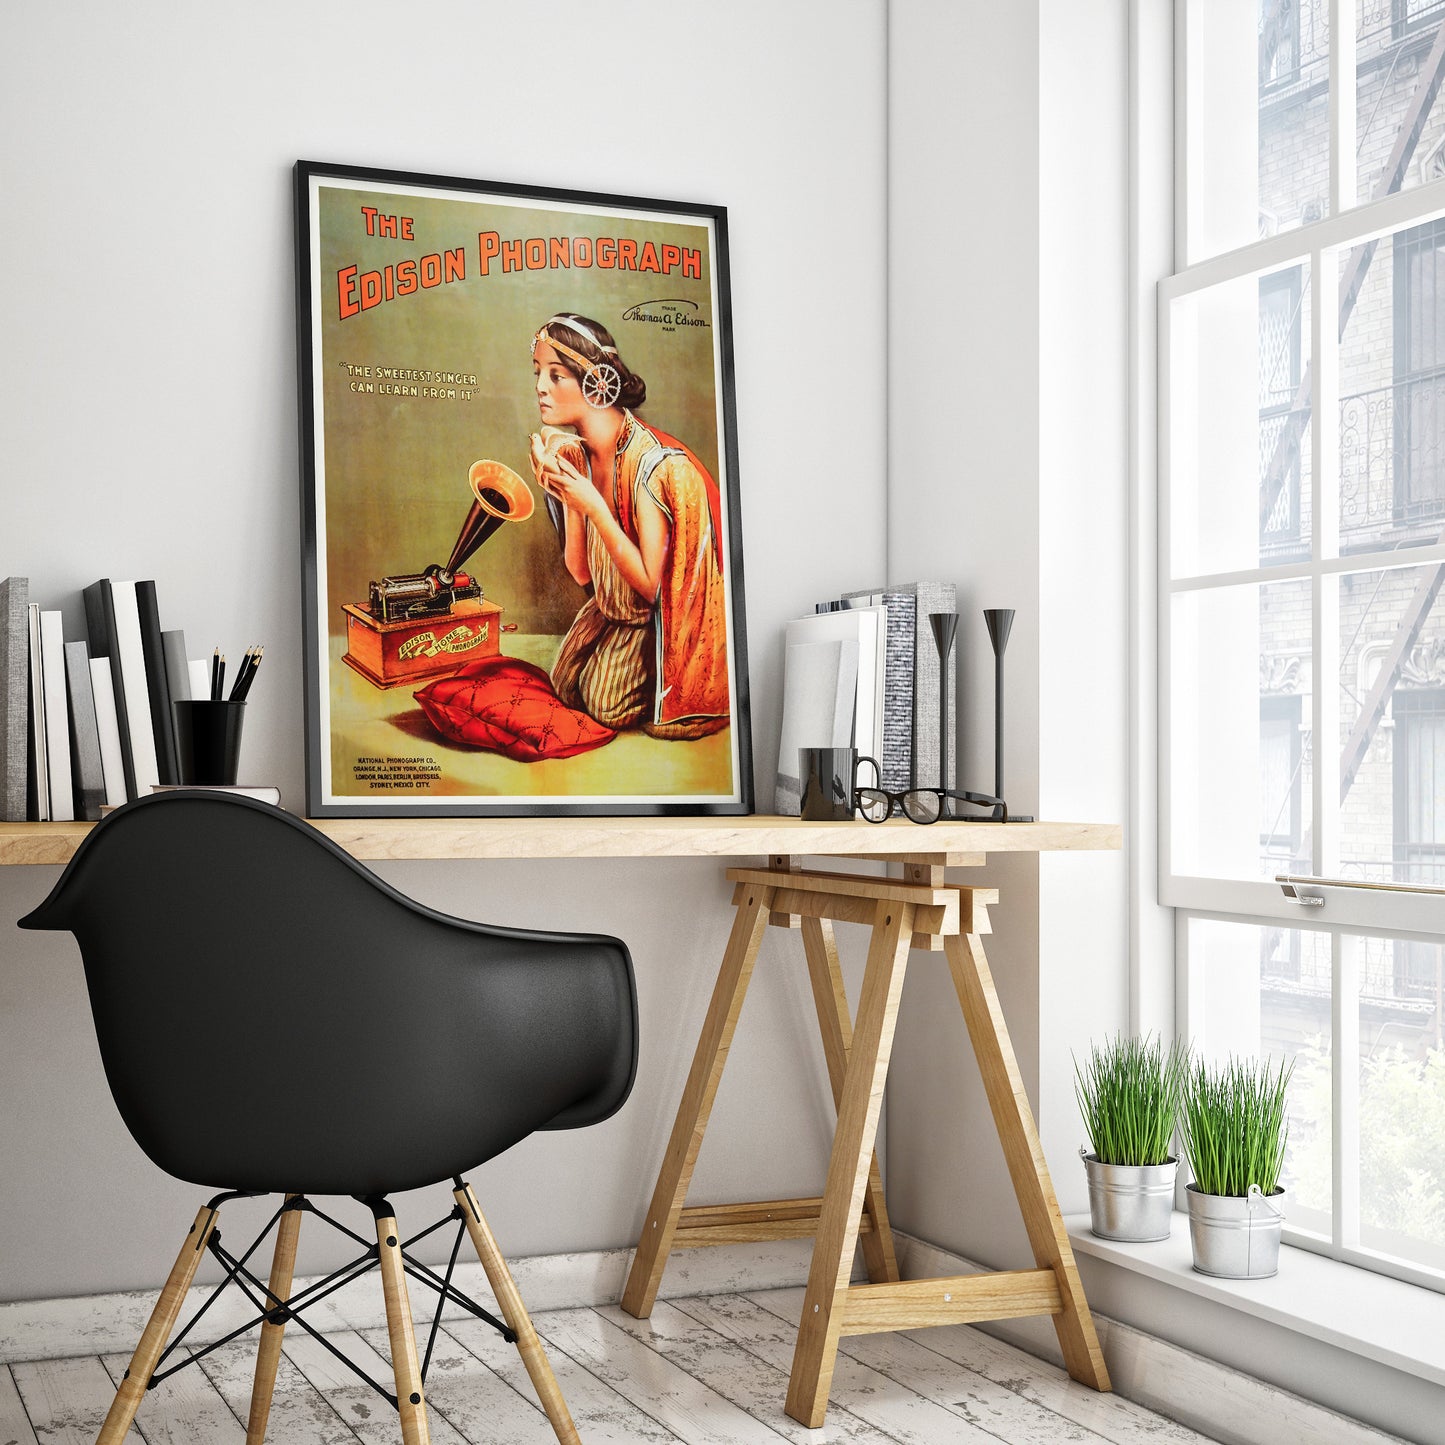 Edison Phonograph advertising poster with woman and dove